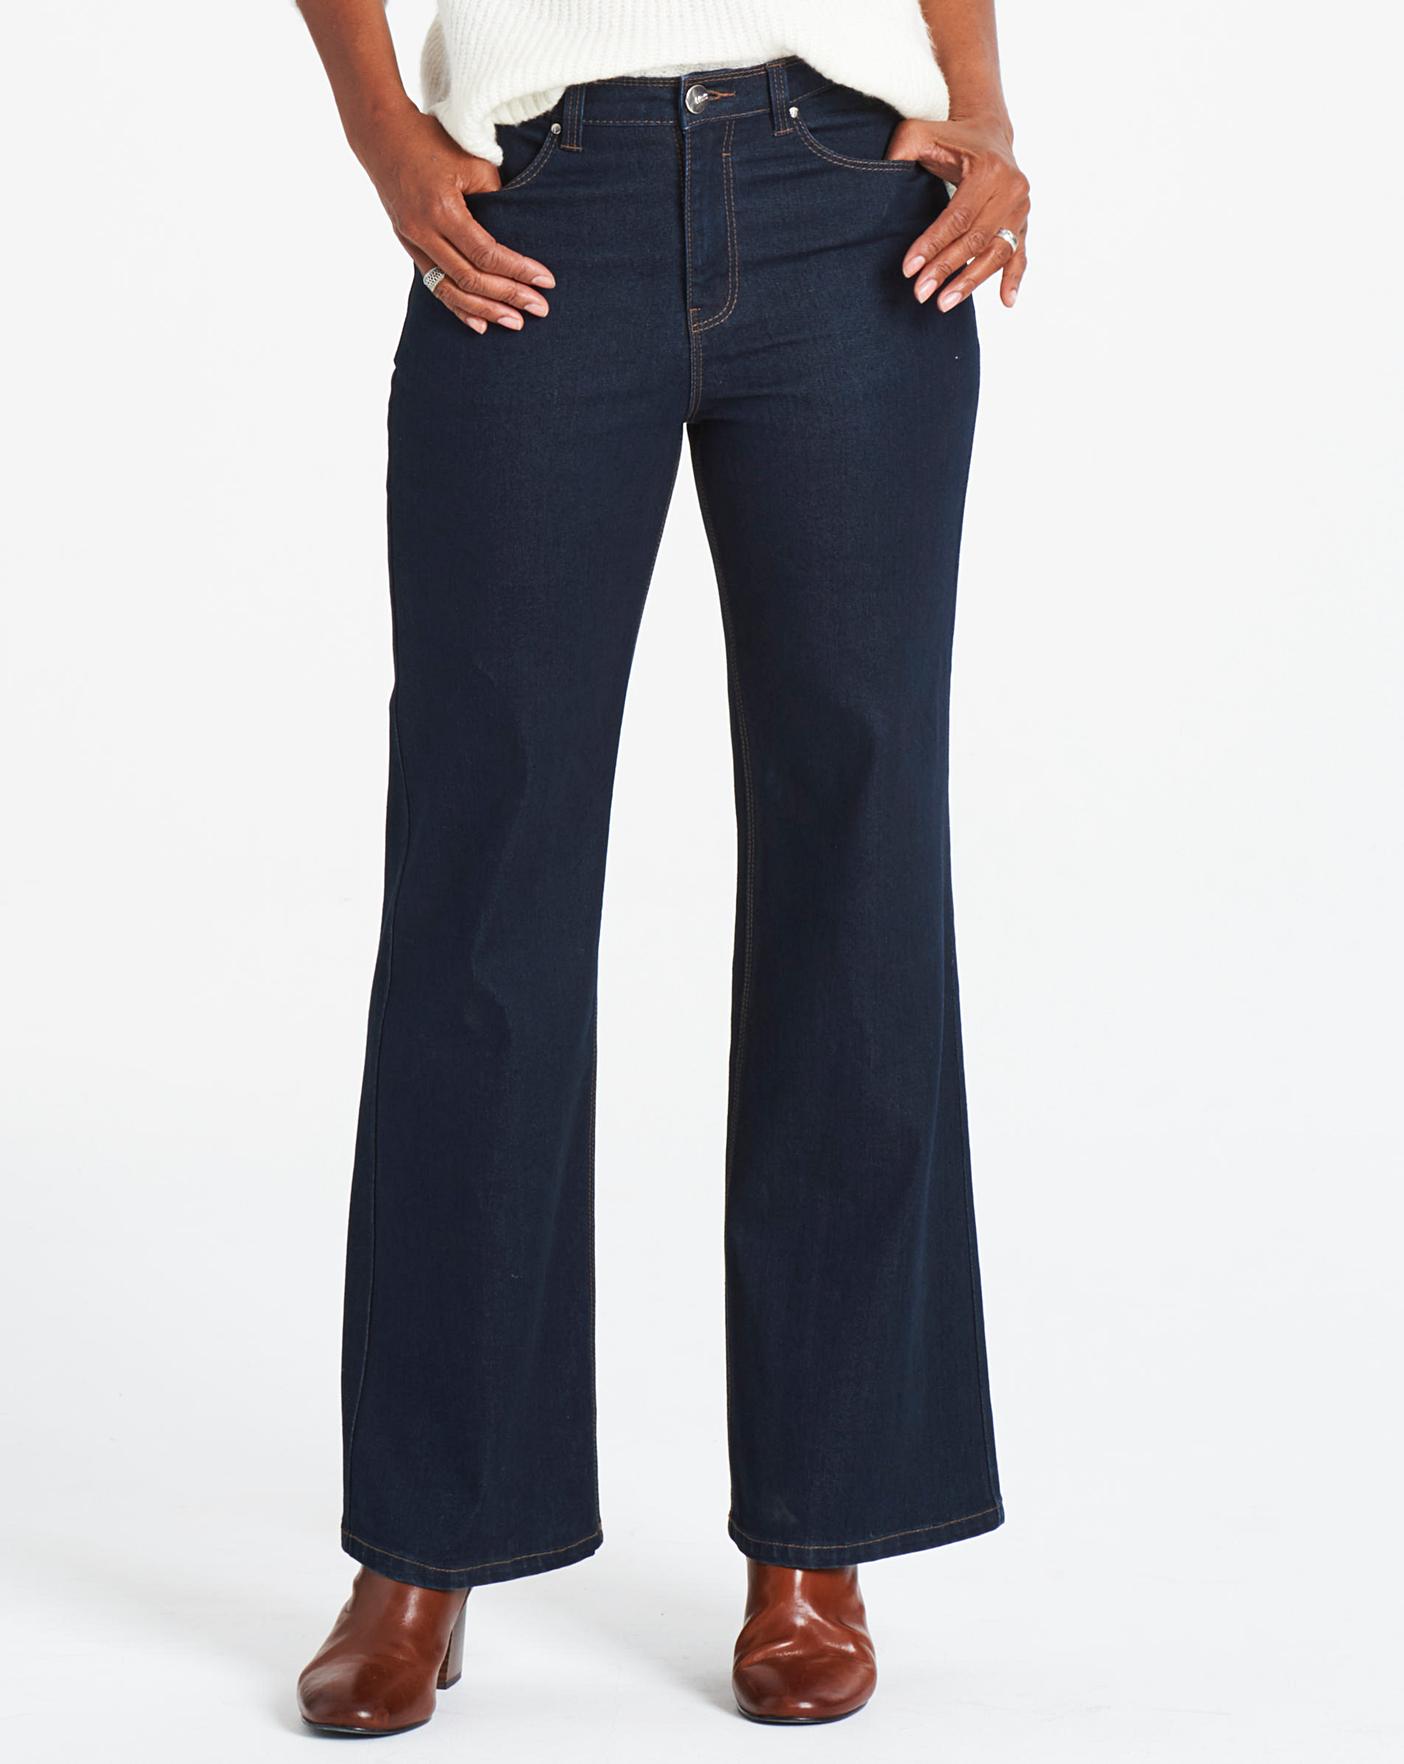 Indigo Everyday Wide Leg Jeans Long | Oxendales